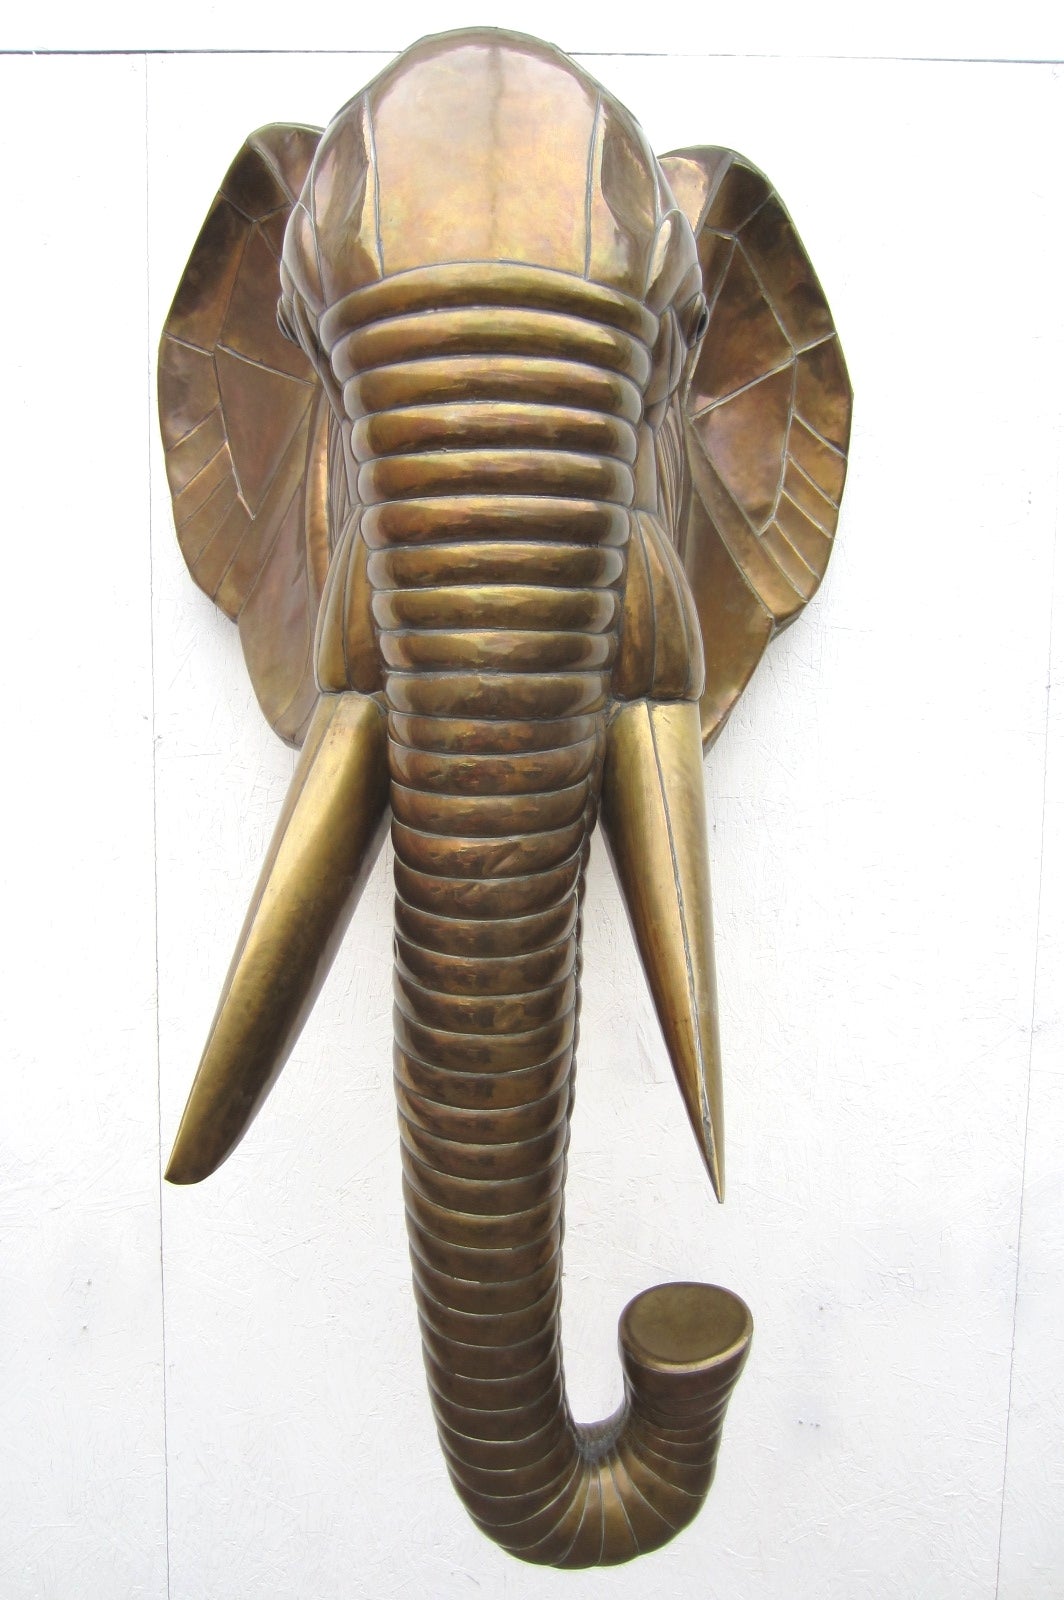 Huge life size elephant head wall sculpture by artist Sergio Bustamante.
 Sculpted in hammered brass with a dark golden aged patina. Measures 5-1/2' tall and 3' wide.
Excellent condition.